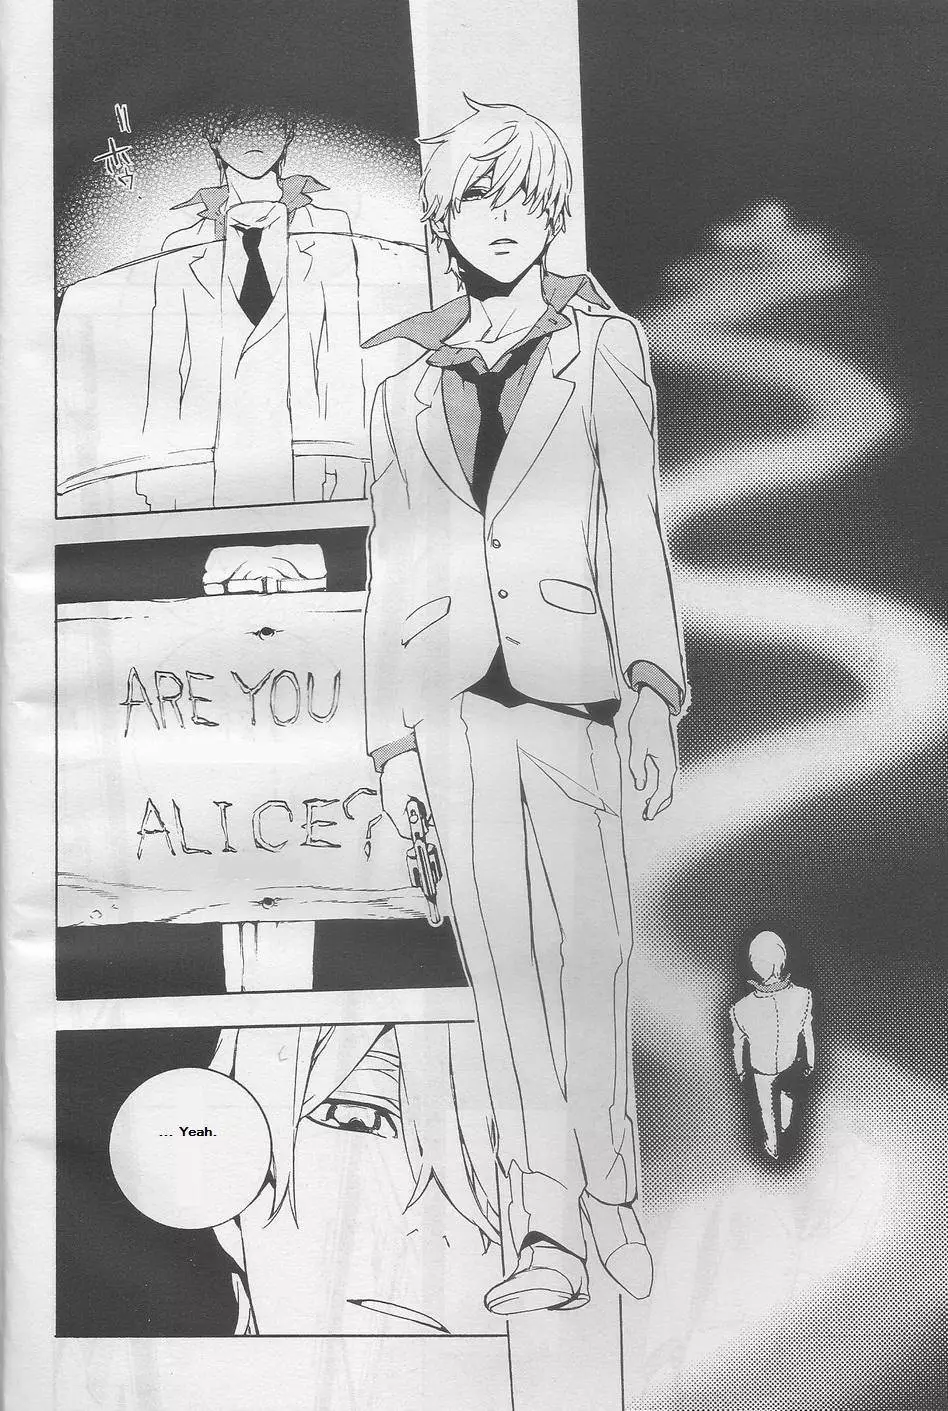 Are You Alice? - 19 page p_00019